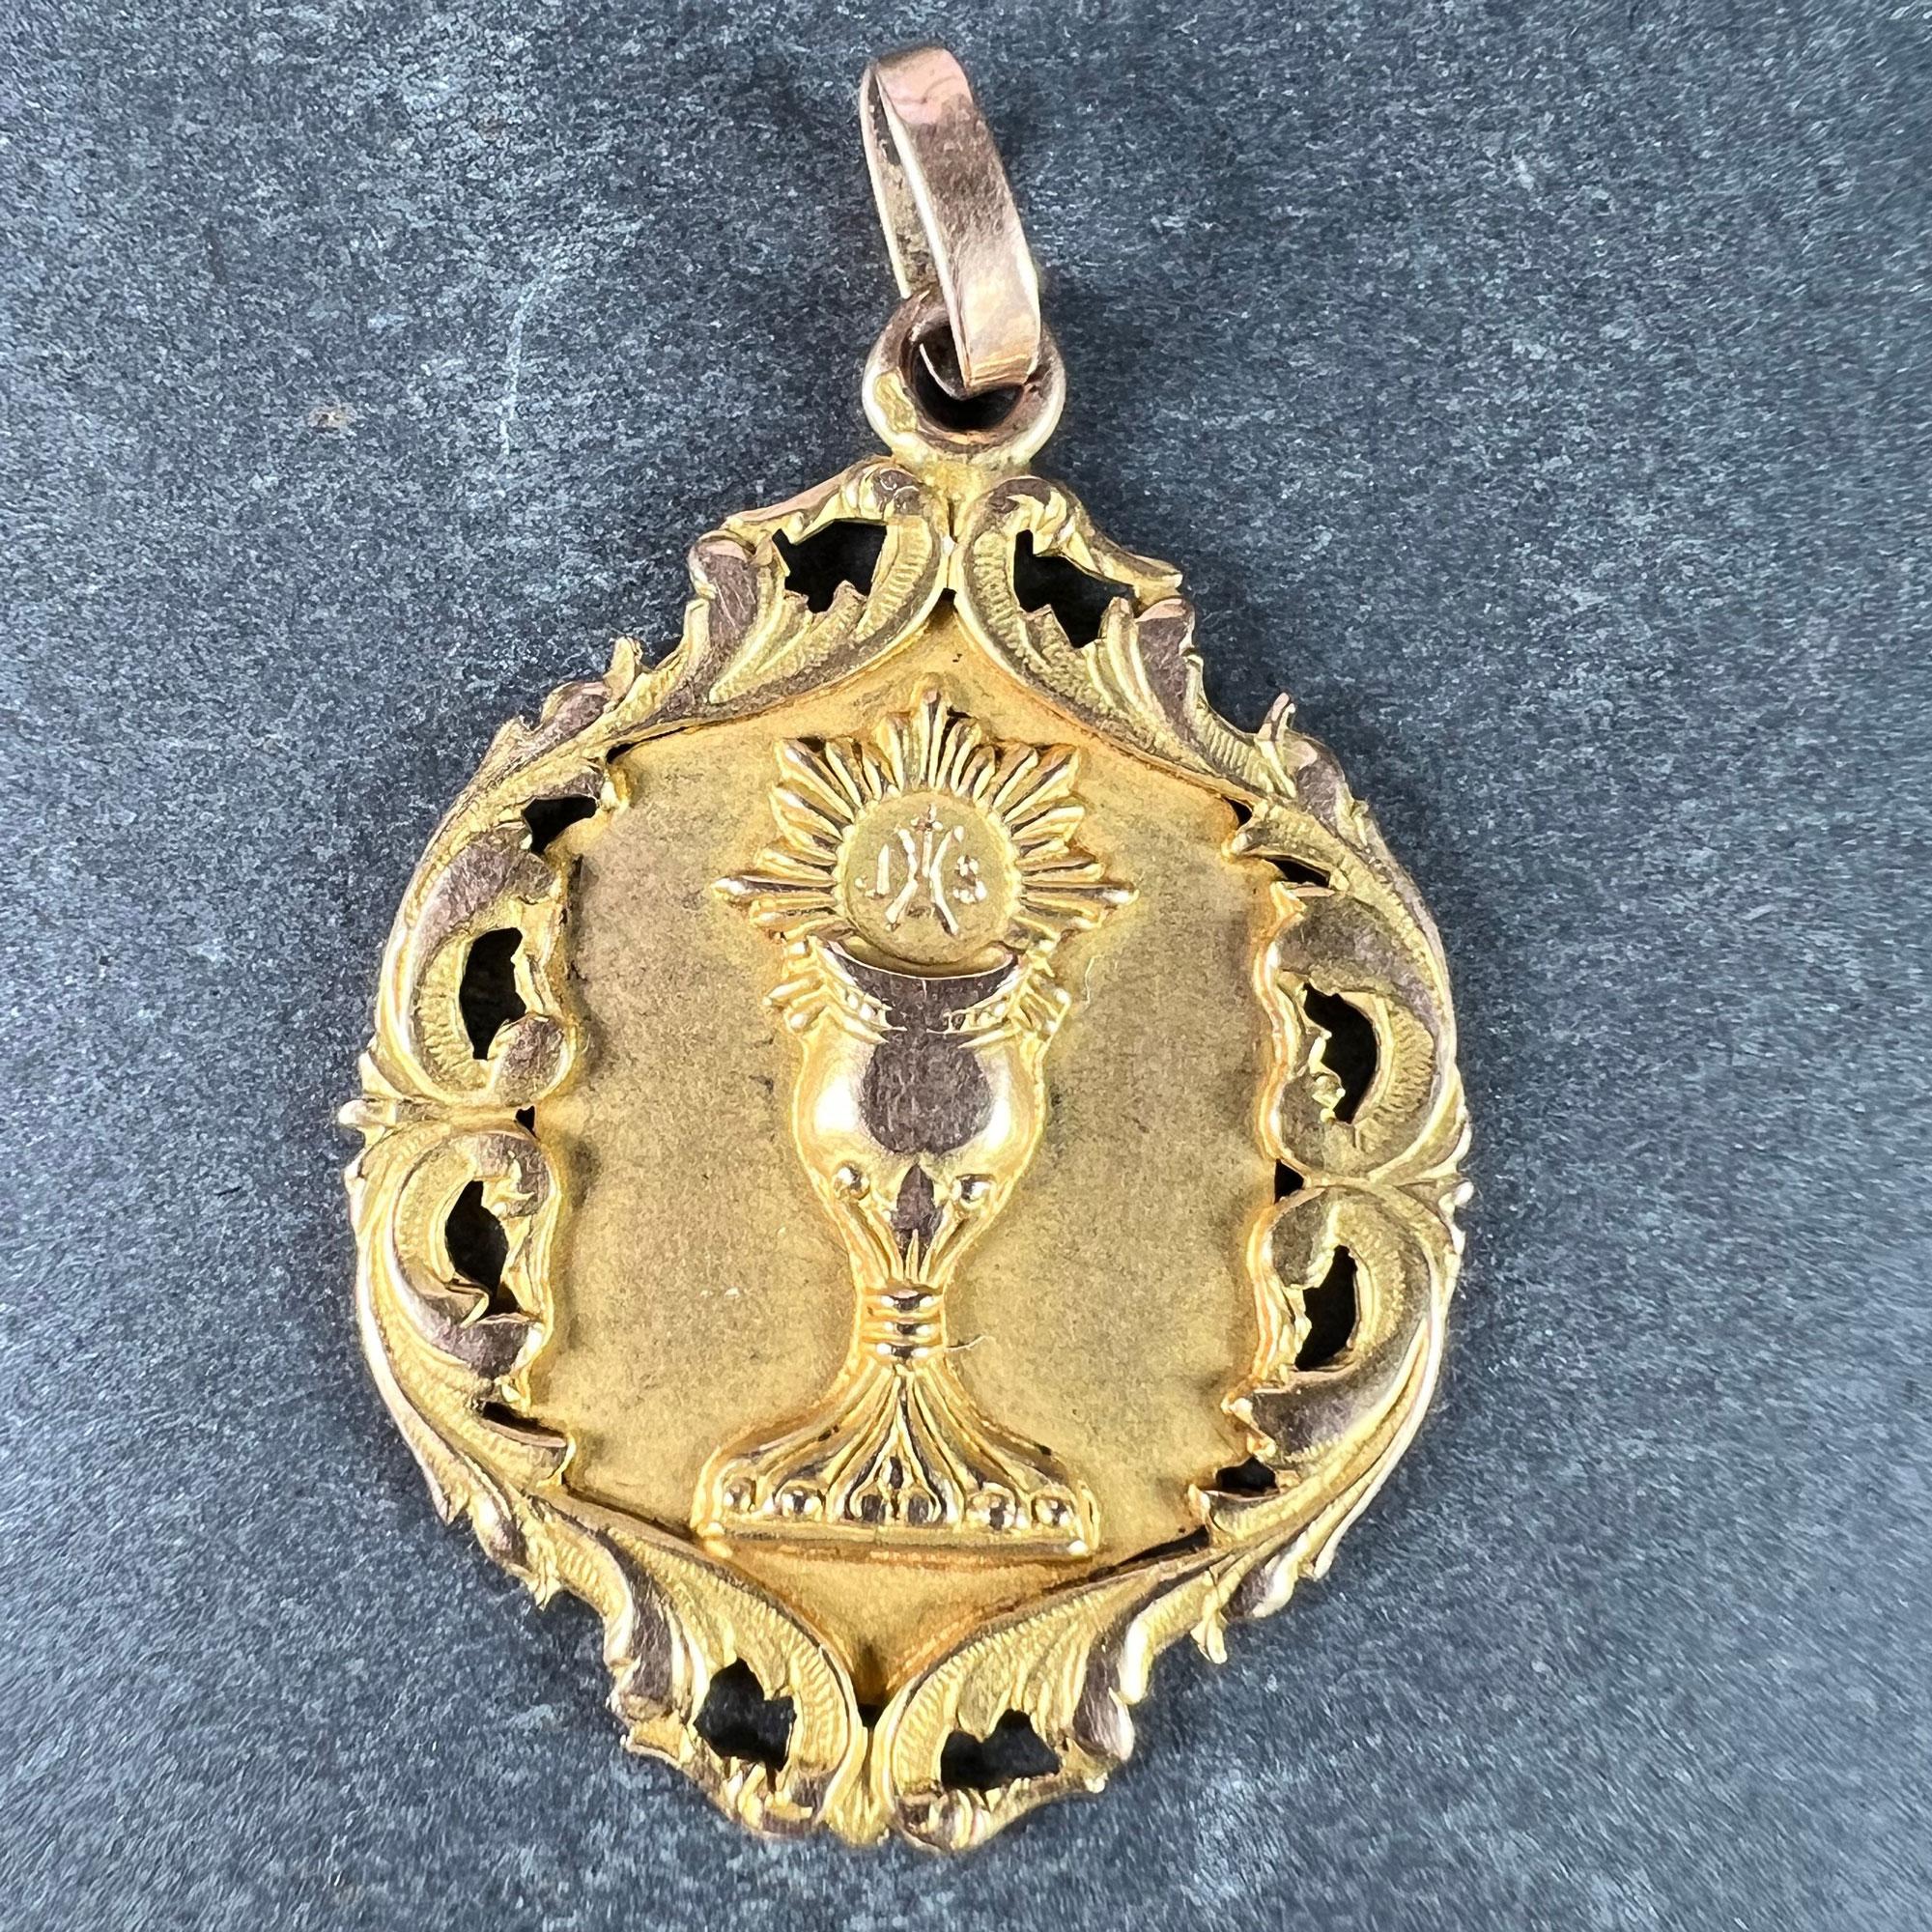 A French 18 karat (18K) yellow and rose gold charm pendant depicting a holy chalice or goblet with a communion wafer engraved IHS above, radiating light to celebrate a First Communion. The edges of the medal are scolled and foliate with pierced